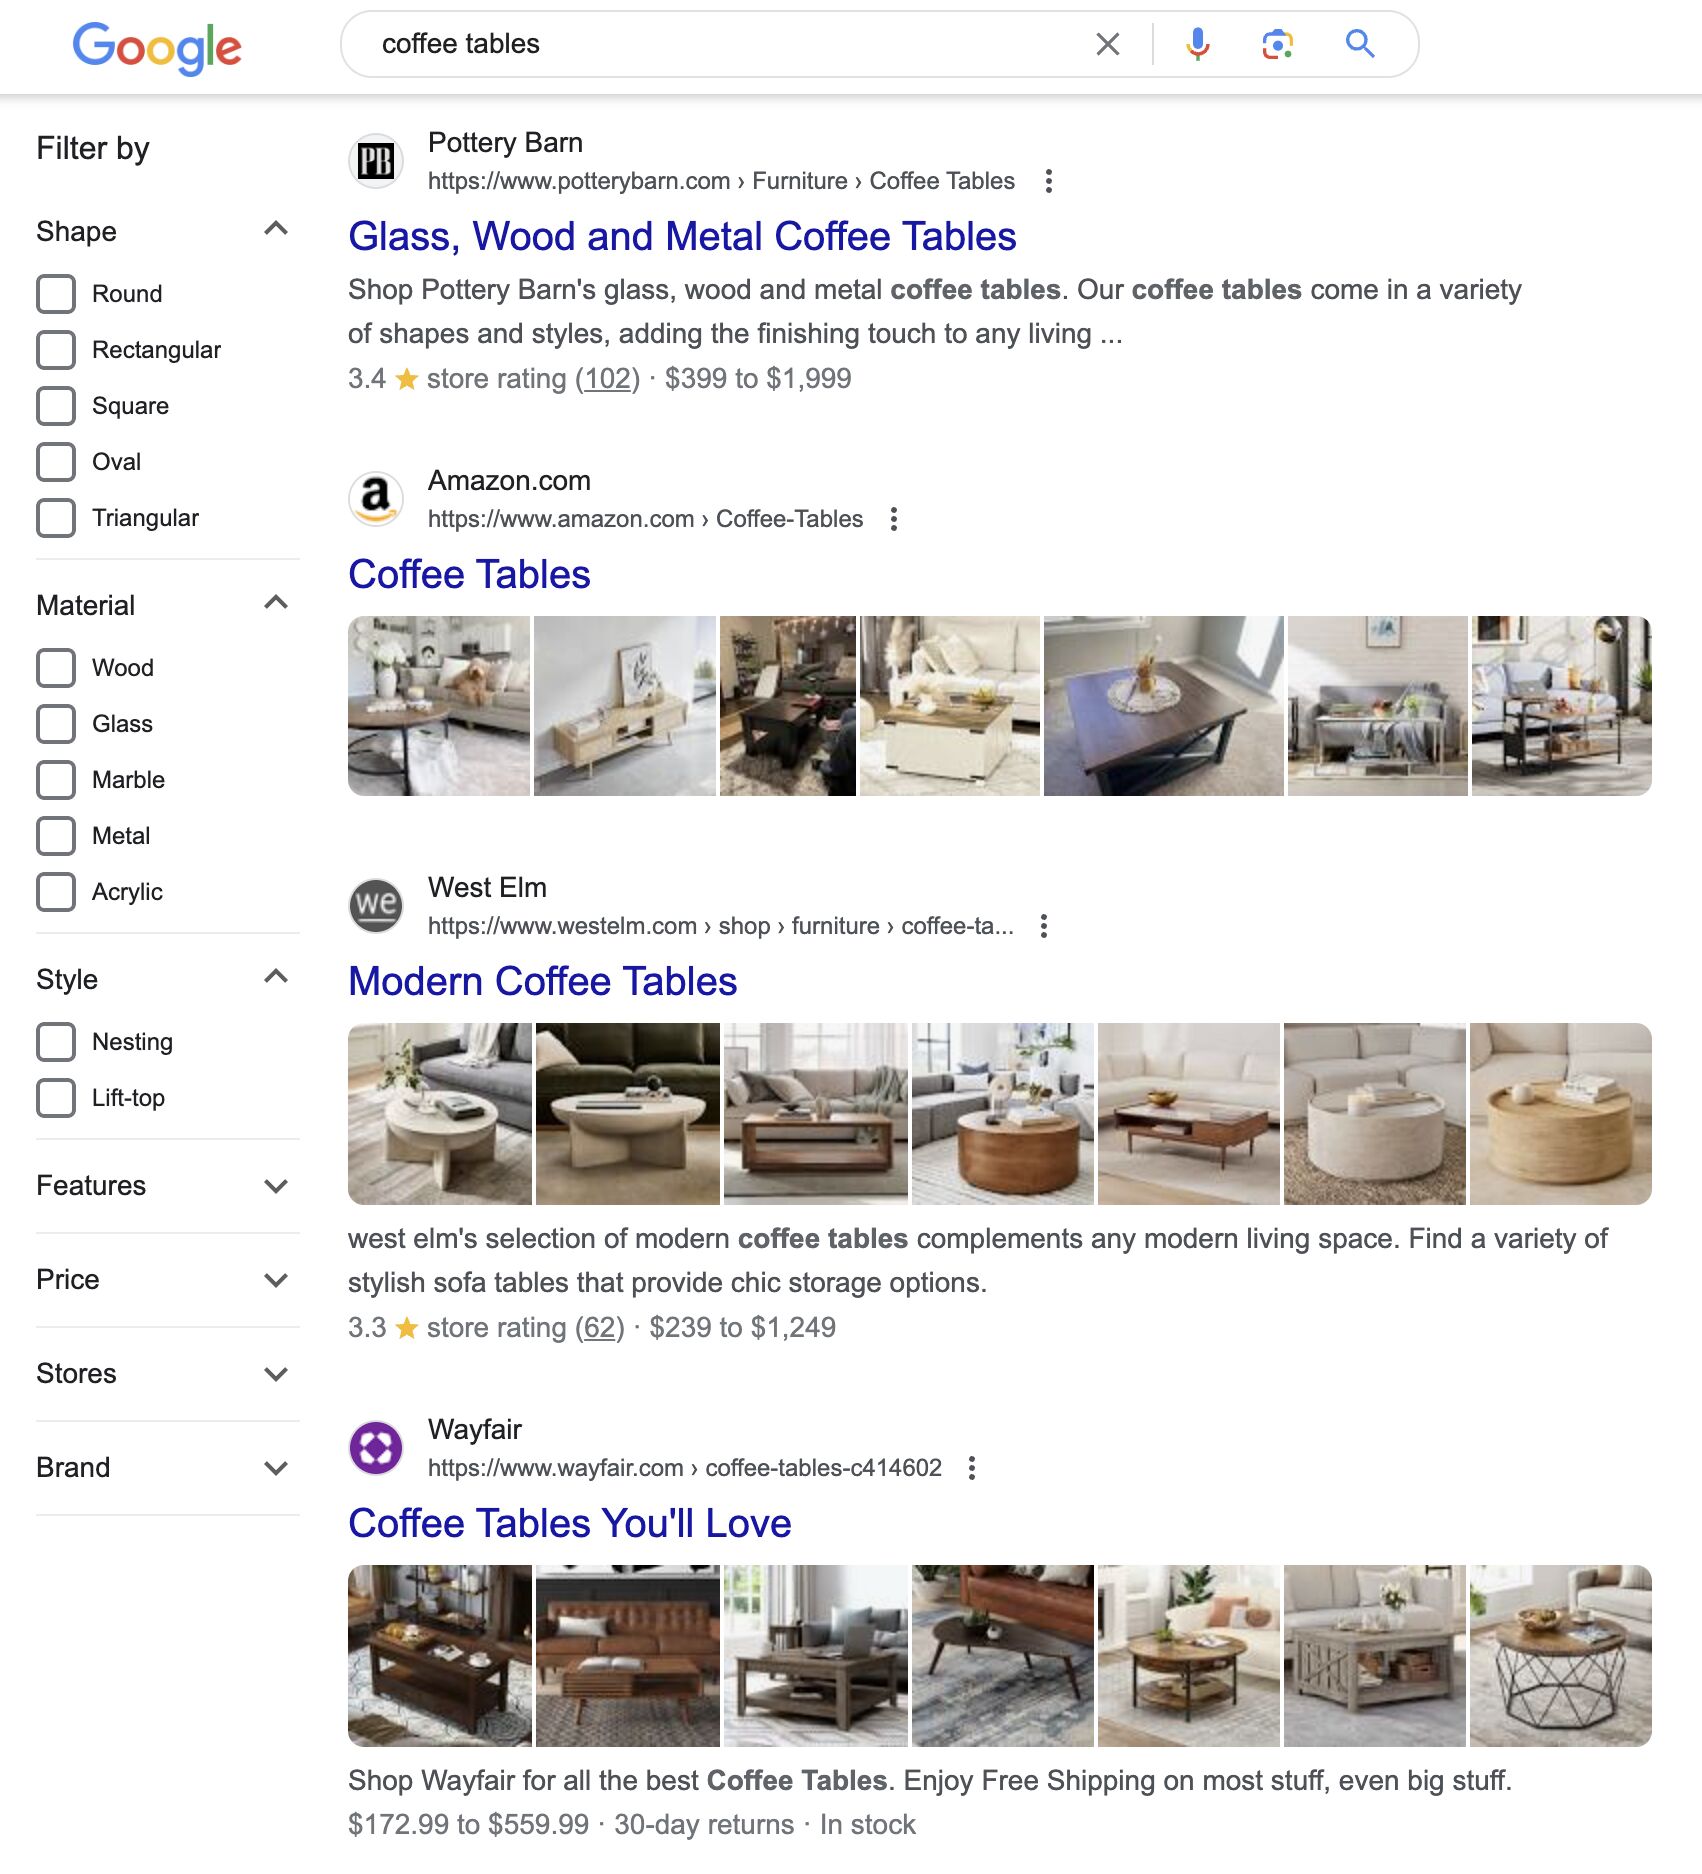 Top results for "coffee tables"